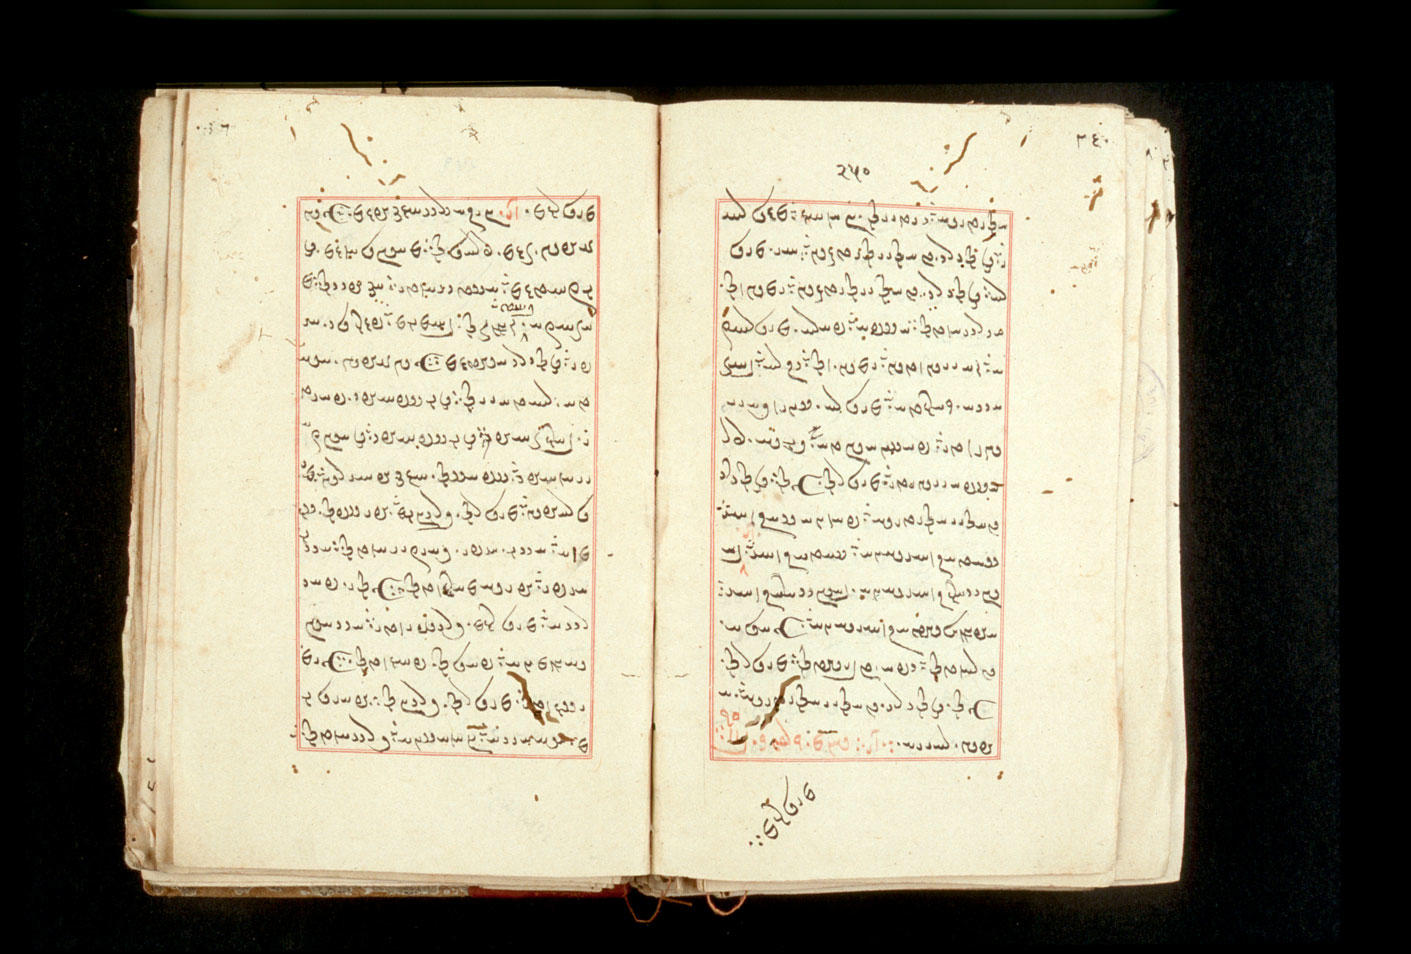 Folios 250v (right) and 251r (left)